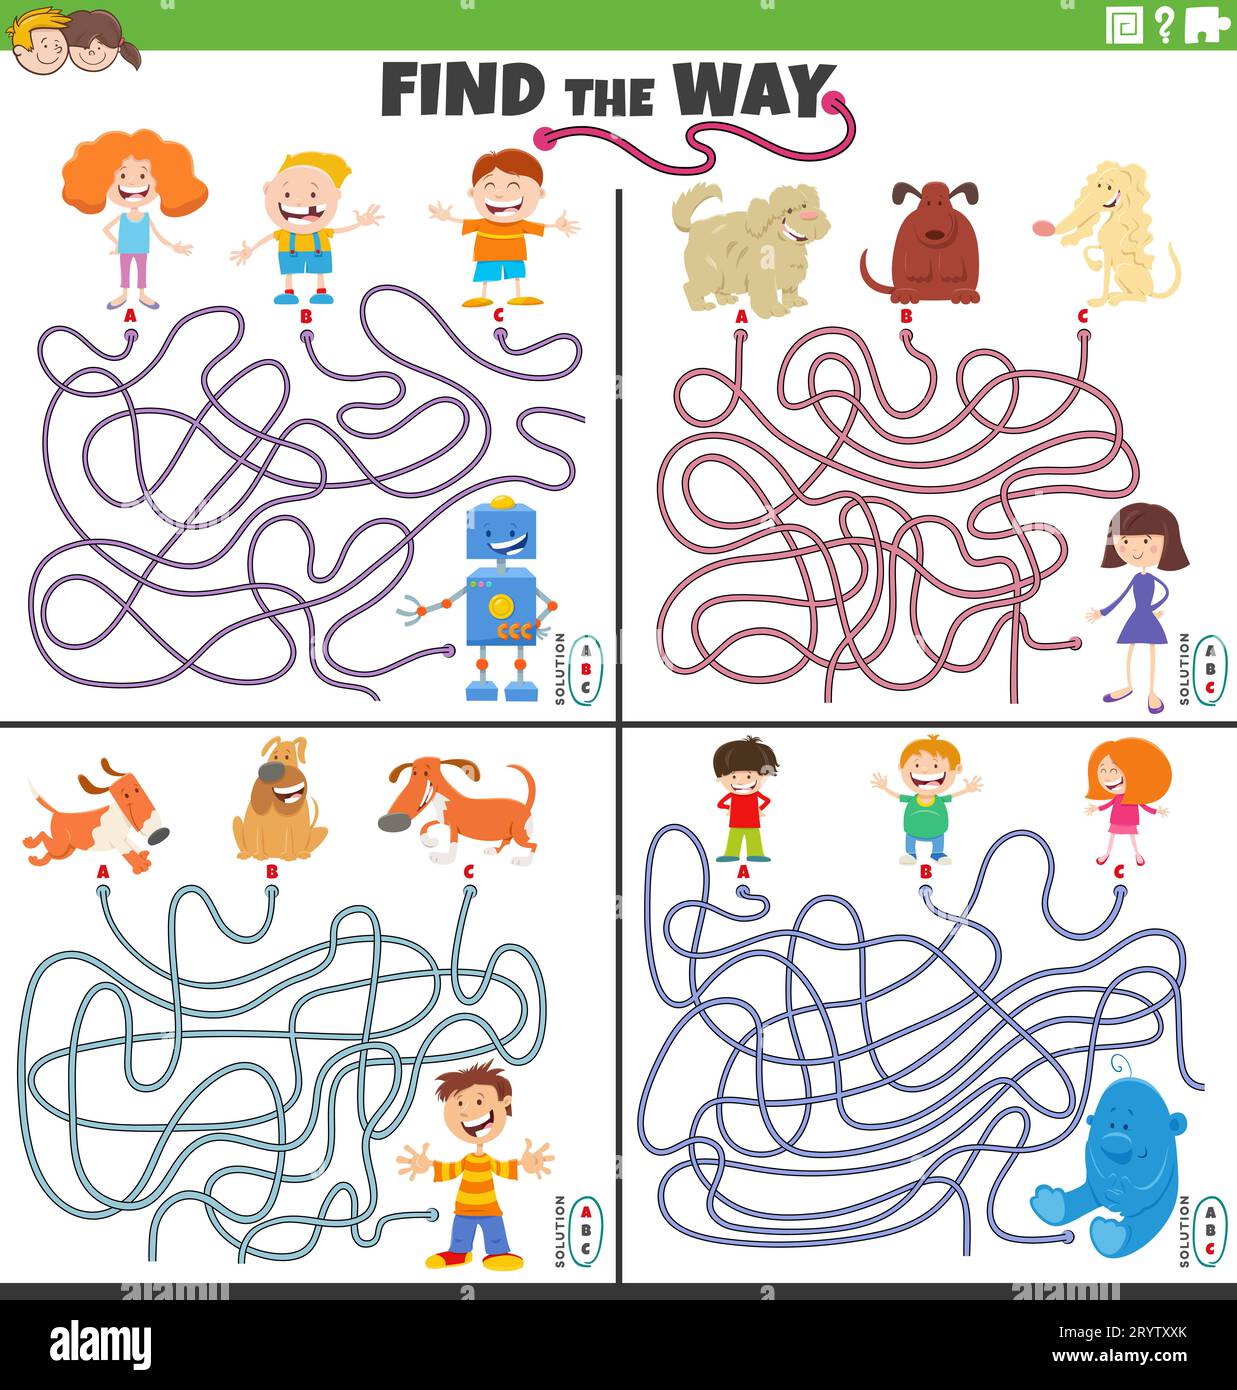 https://c8.alamy.com/comp/2RYTXXK/cartoon-illustration-of-find-the-way-maze-puzzle-games-set-with-children-and-dogs-and-toys-2RYTXXK.jpg